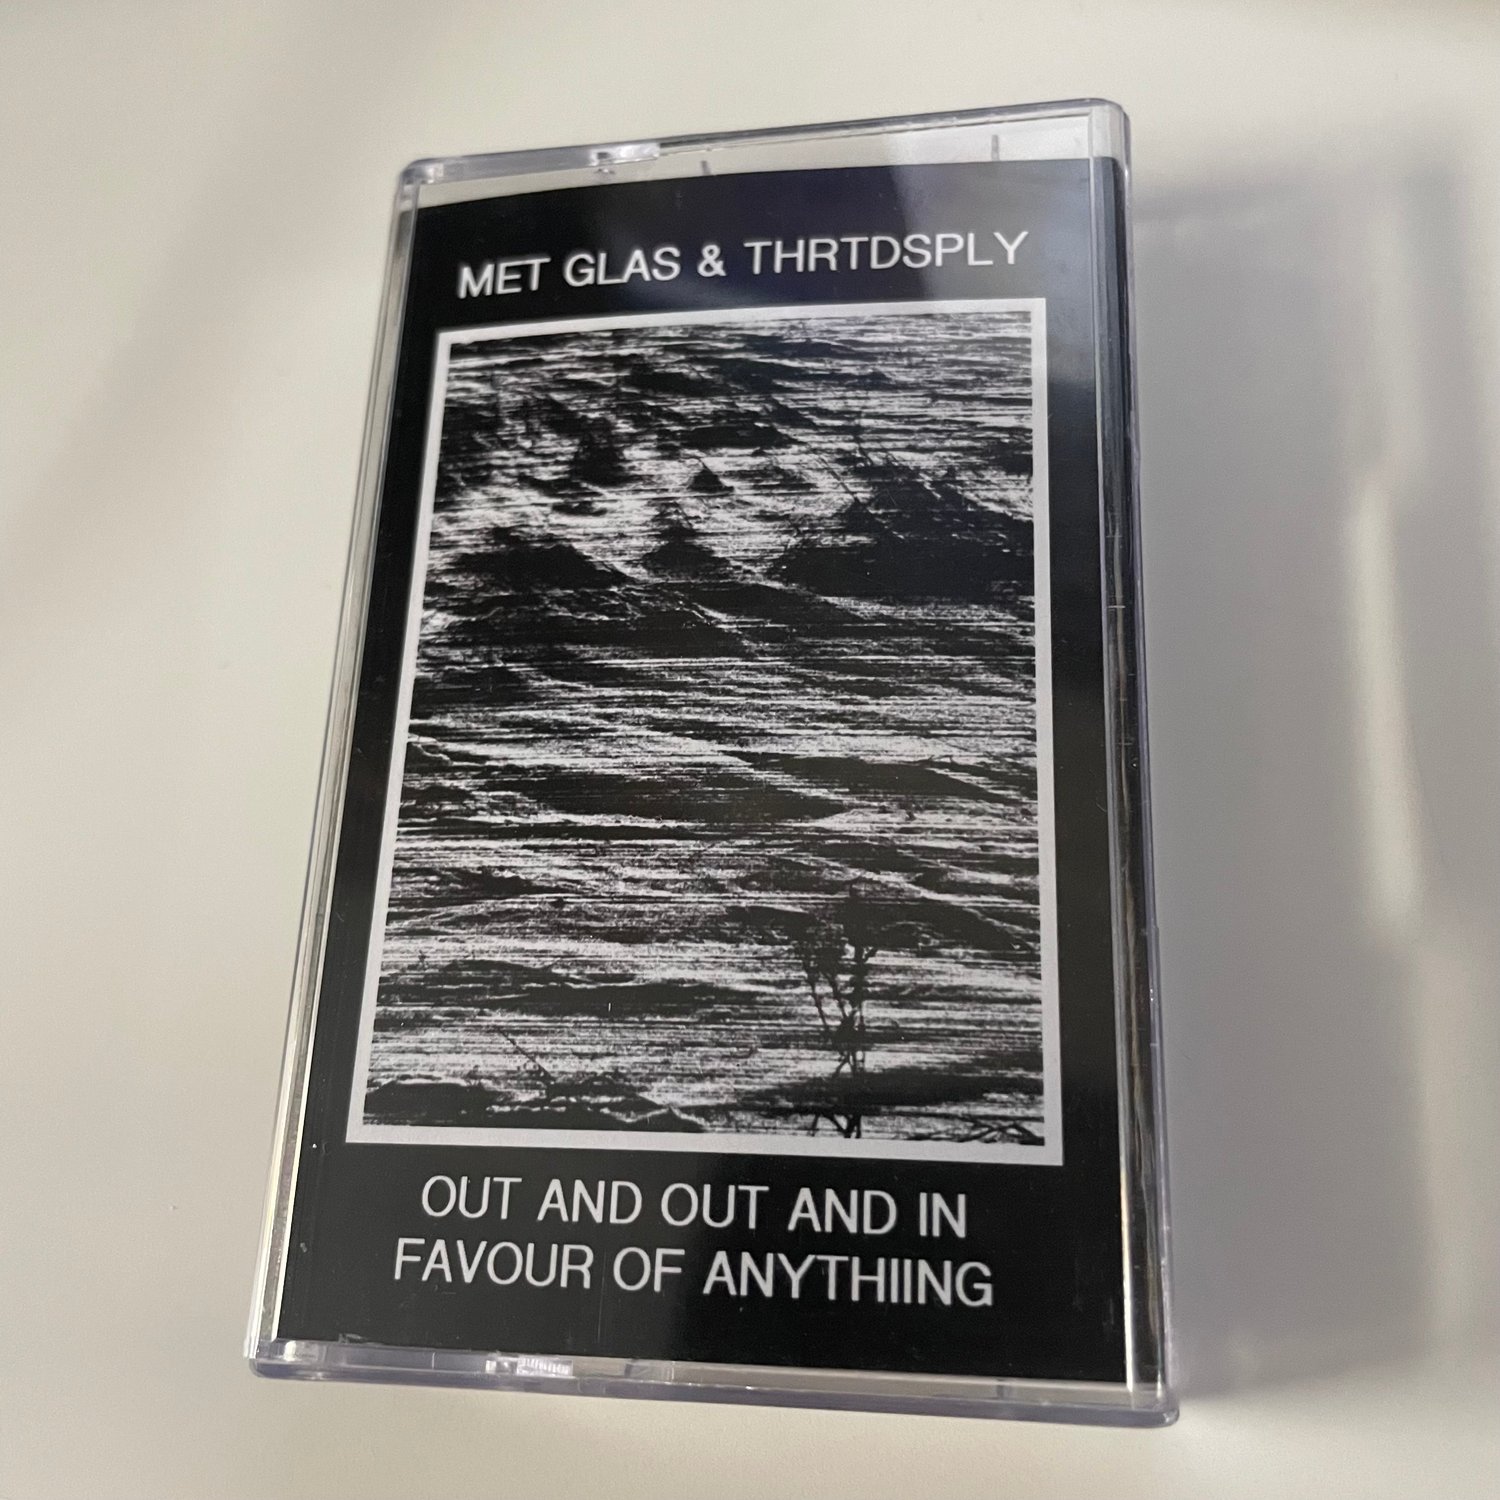 MET GLAS & THRTDSPLY - Out And Out And In Favour Of Anythiing